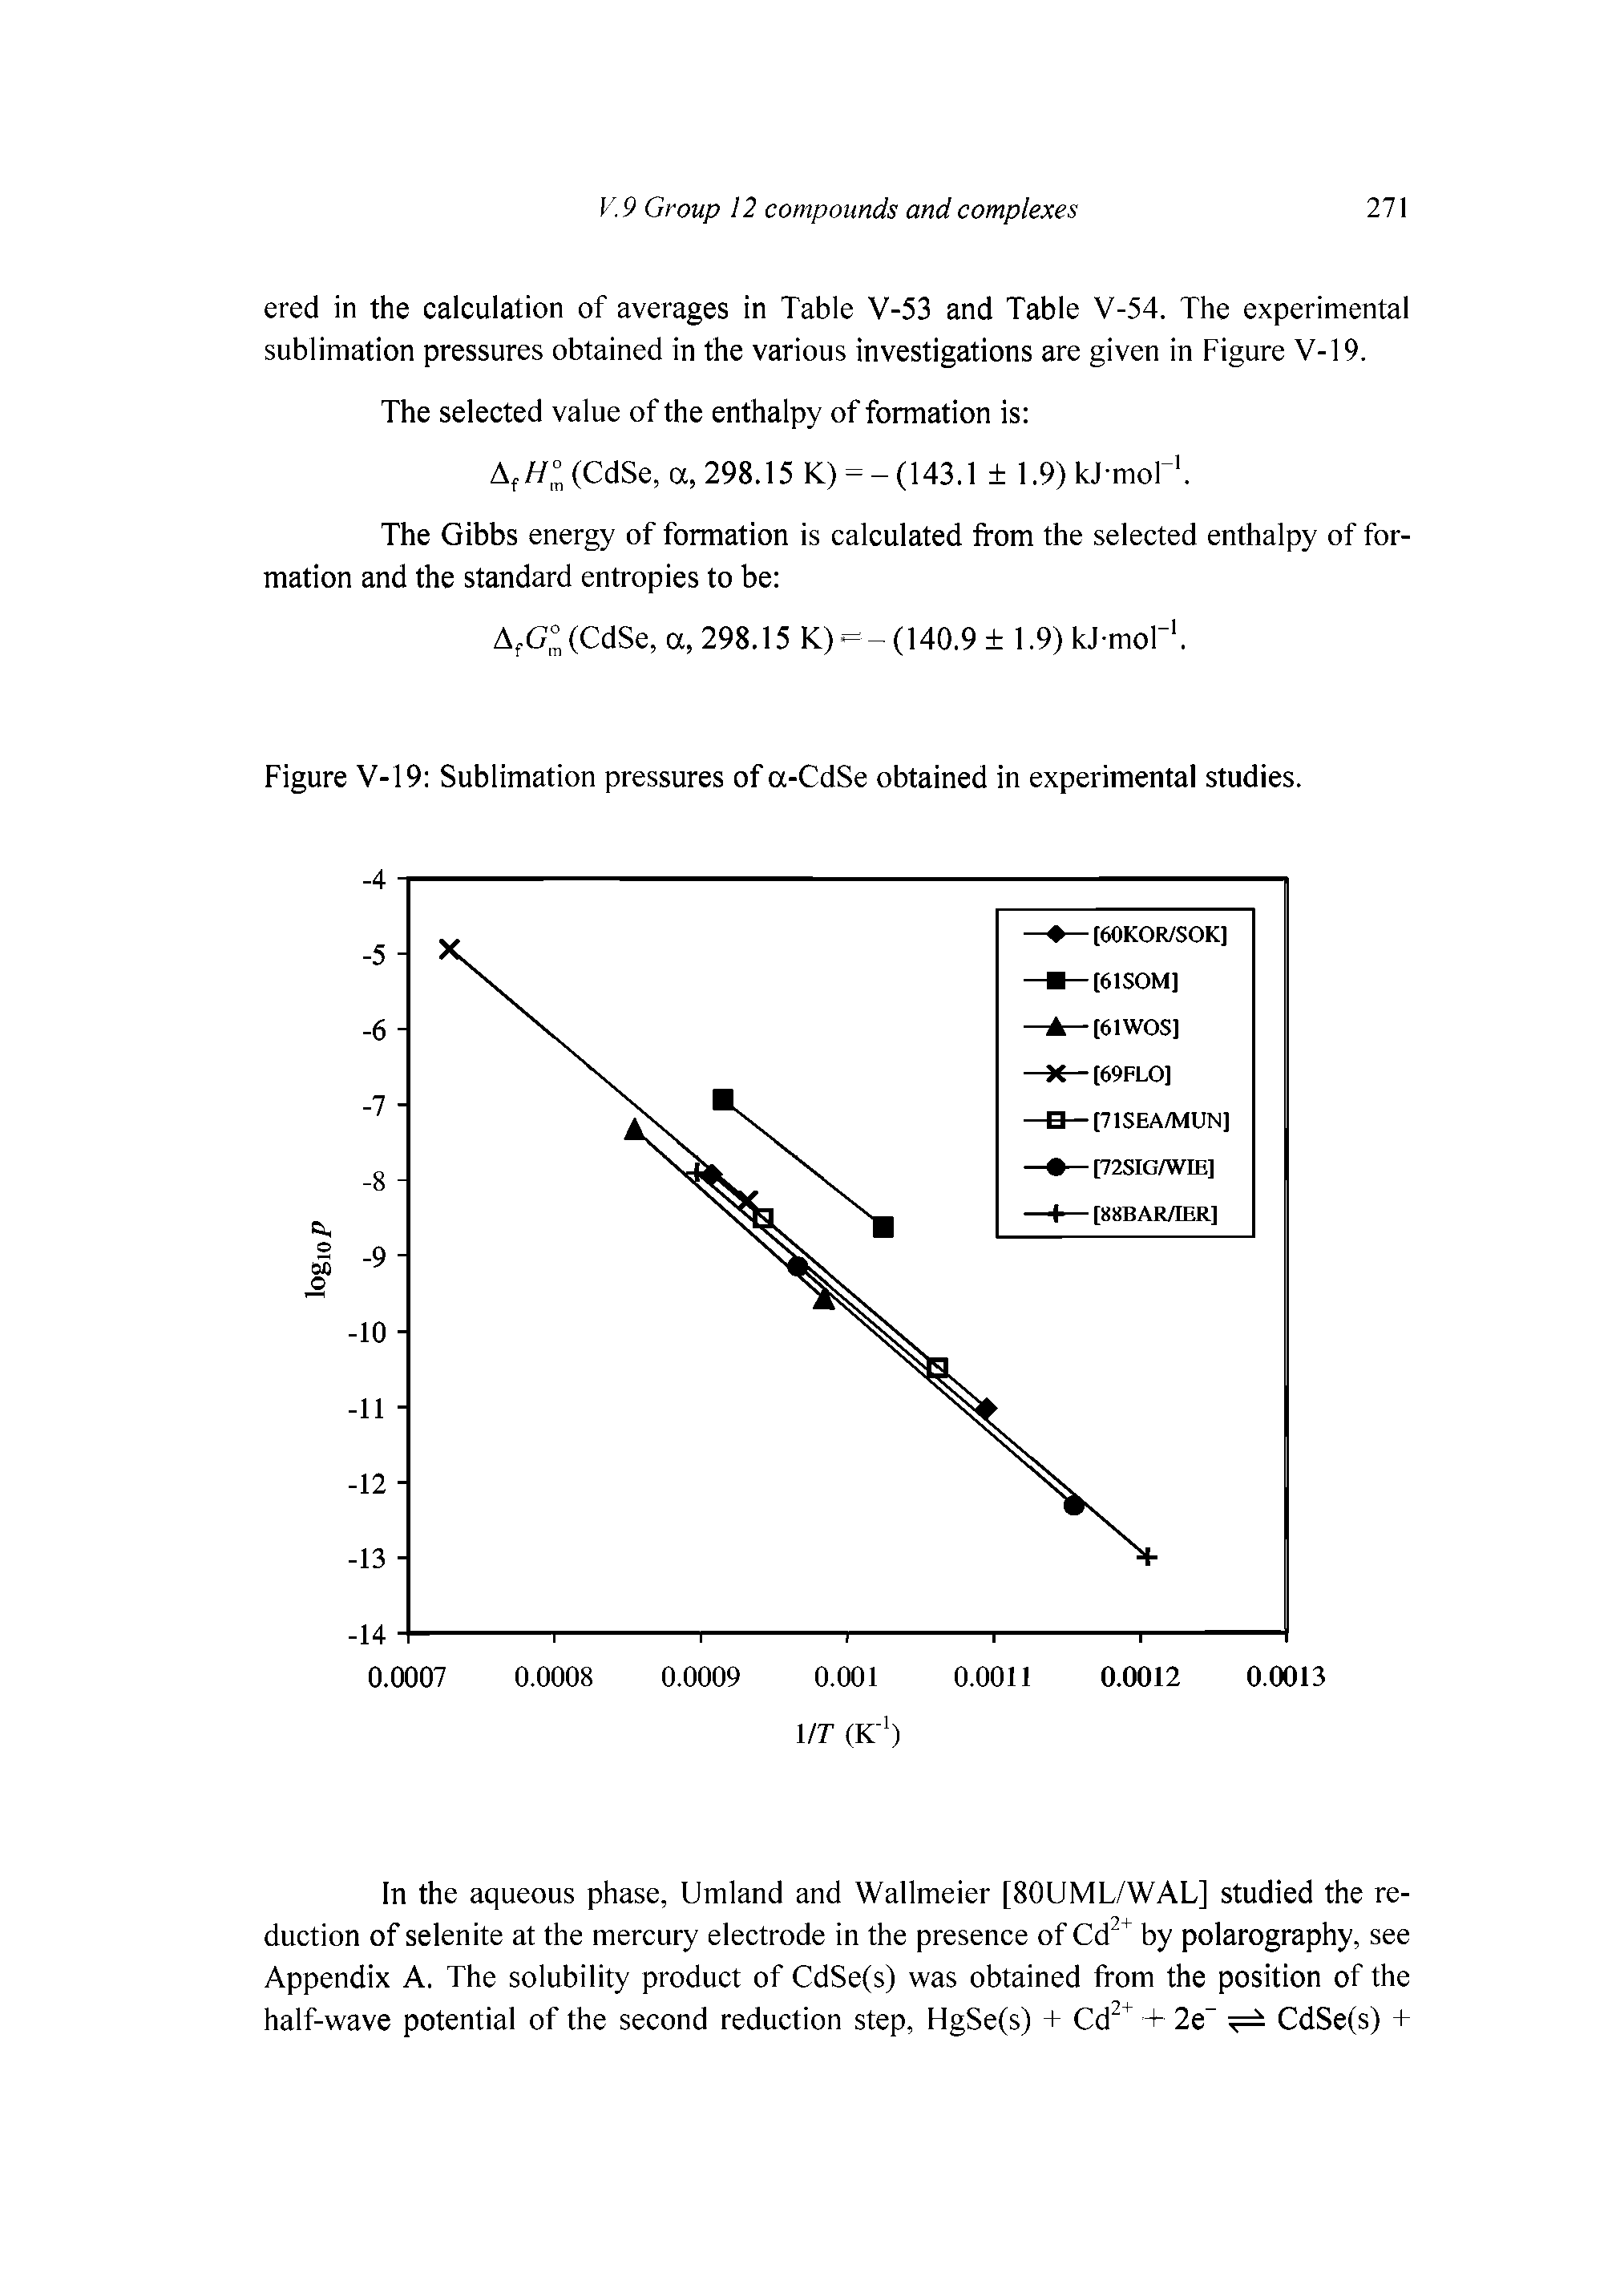 Figure V-19 Sublimation pressures of a-CdSe obtained in experimental studies.